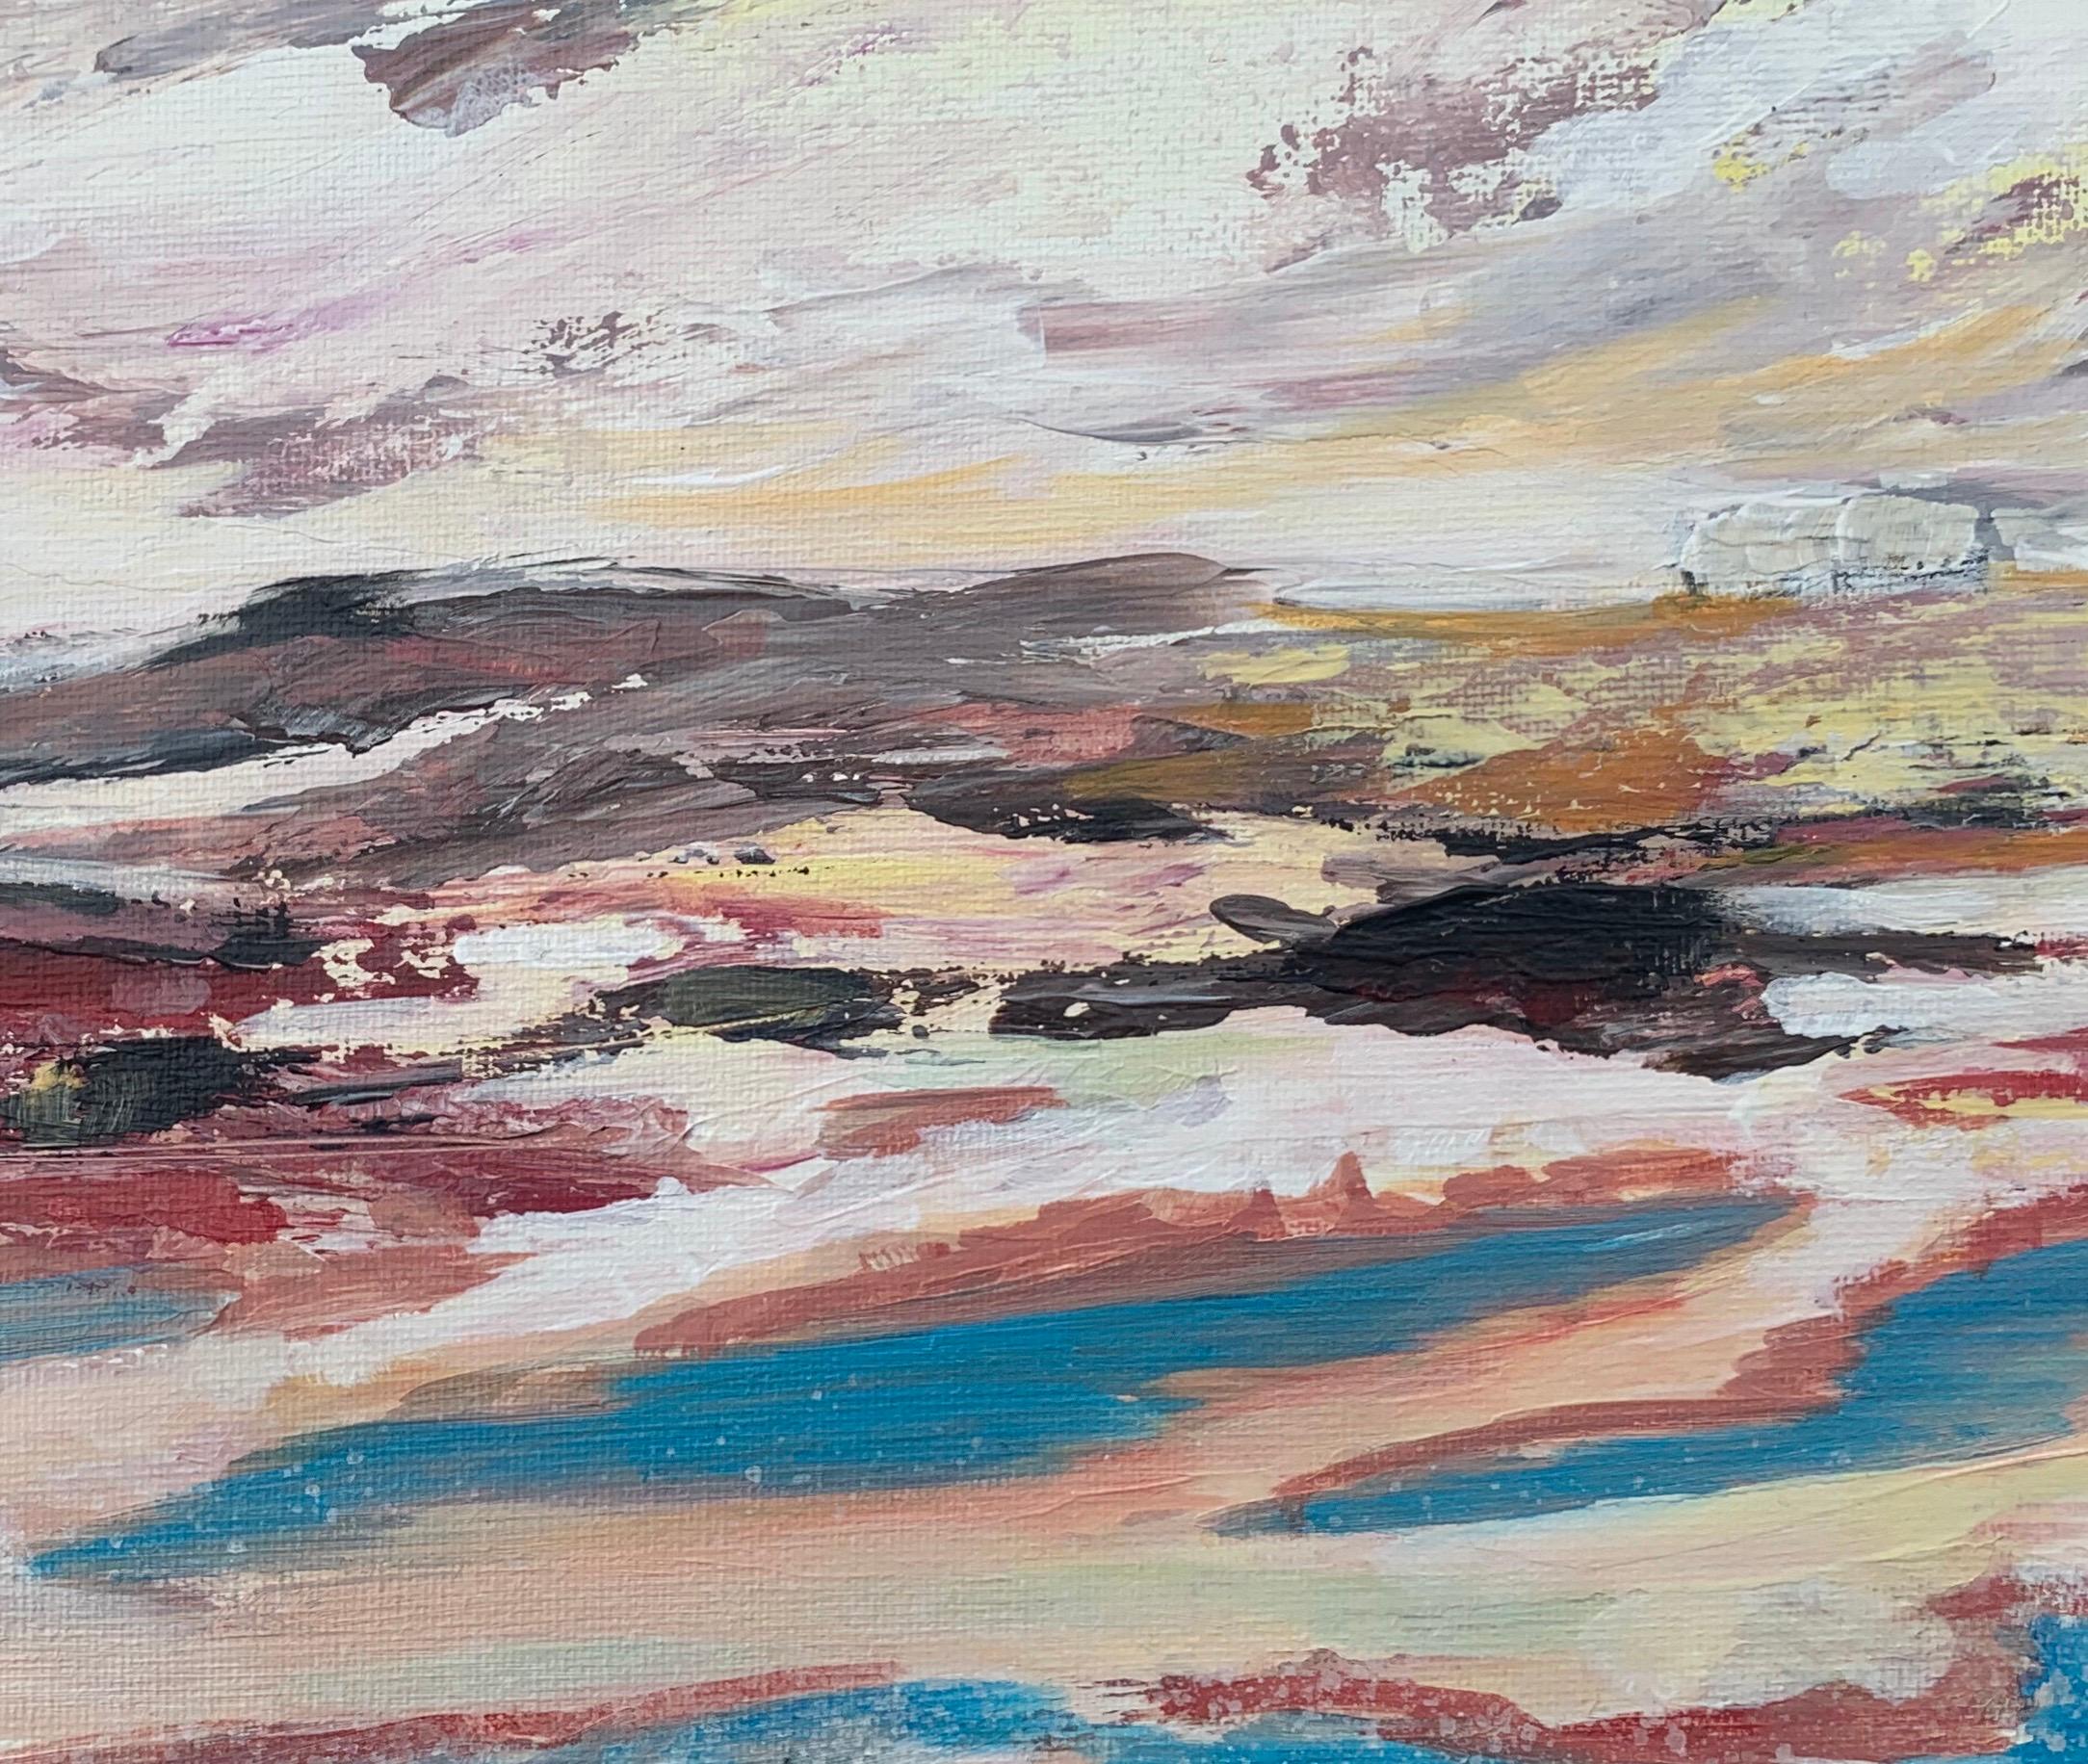 Abstract Study of English Seascape Shoreline by Contemporary British Artist For Sale 2